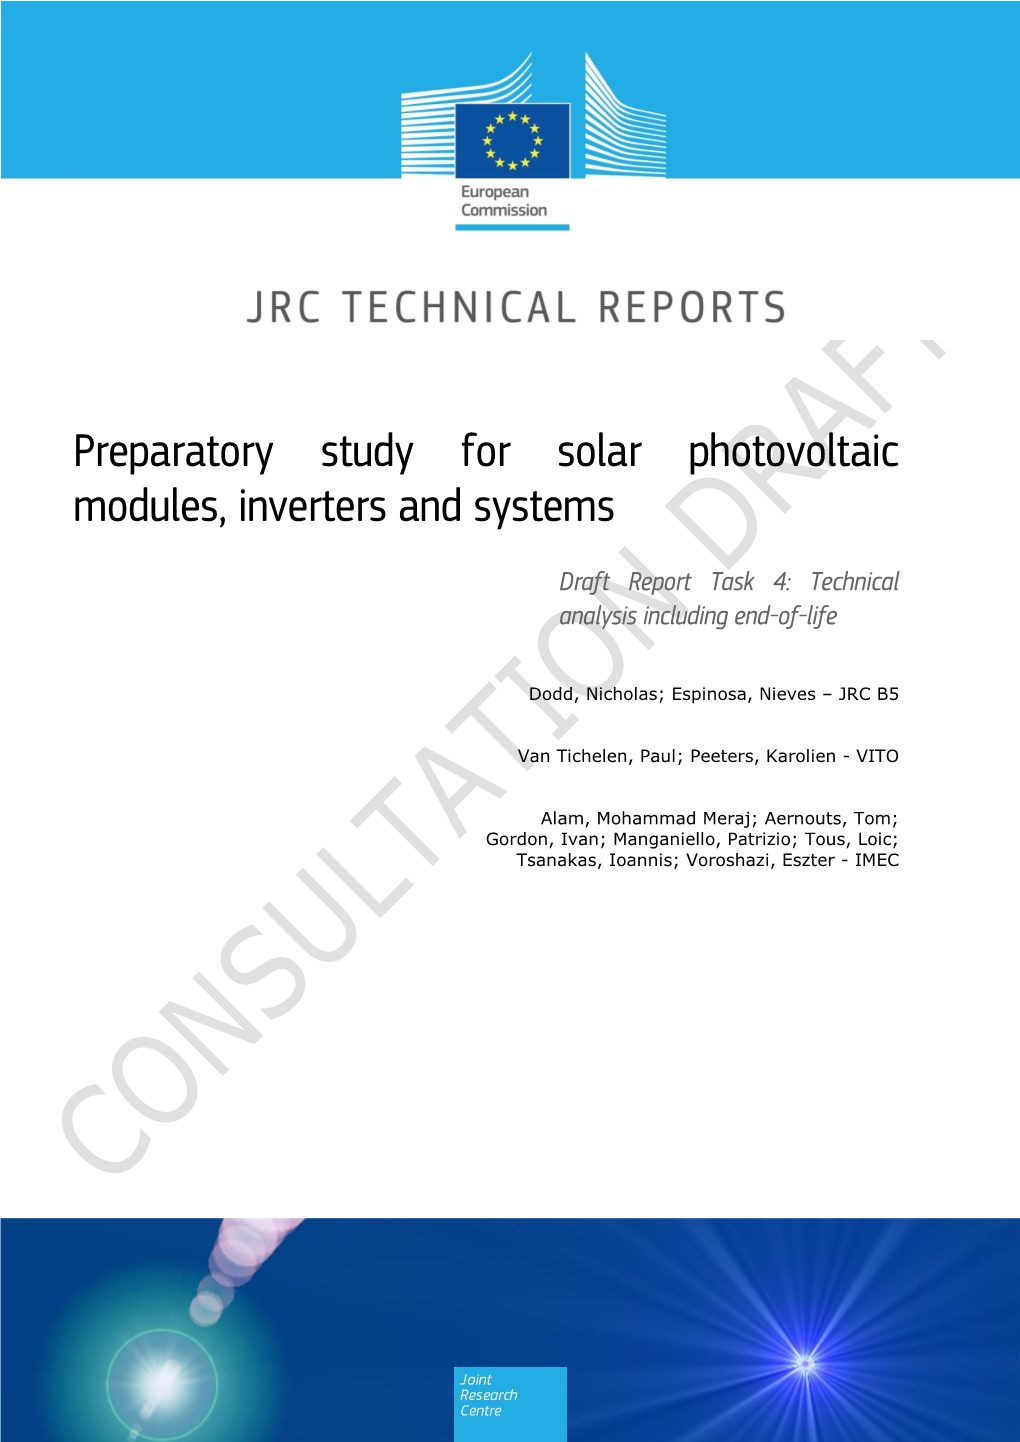 Preparatory Study for Solar Photovoltaic Modules, Inverters and Systems